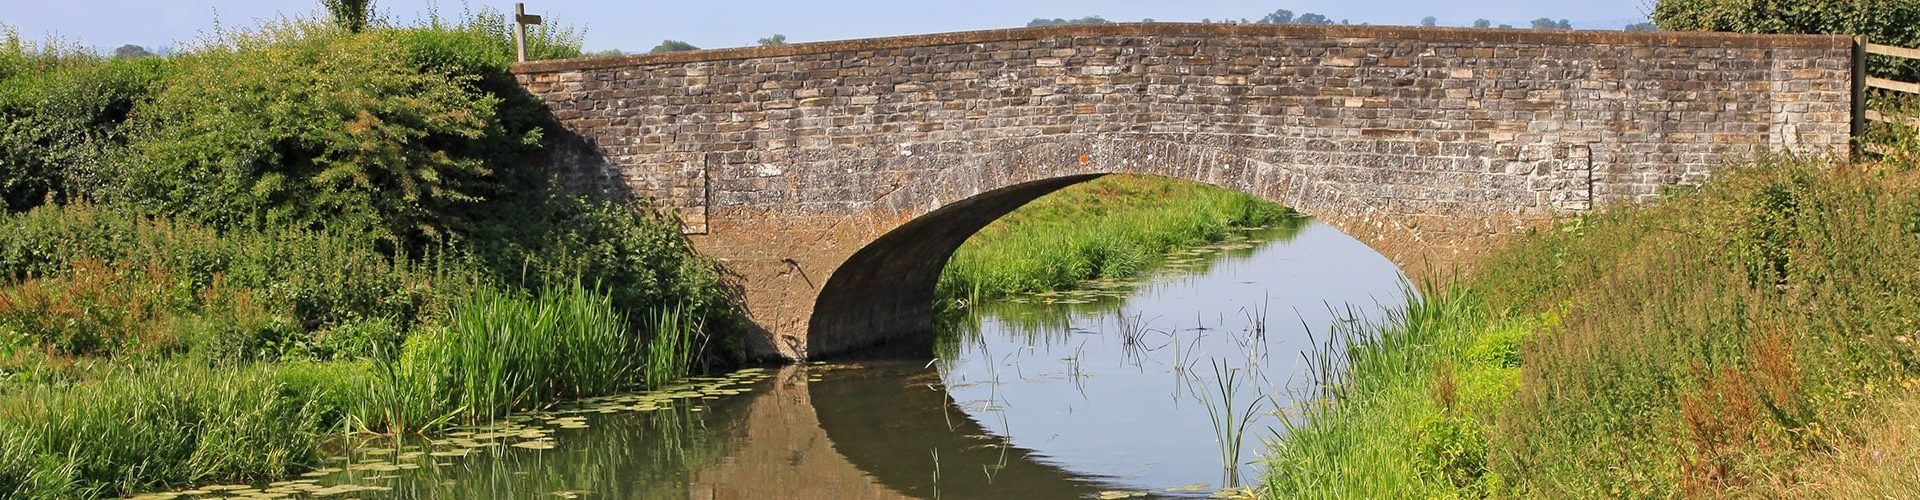 An old stone bridge spans a country river in England